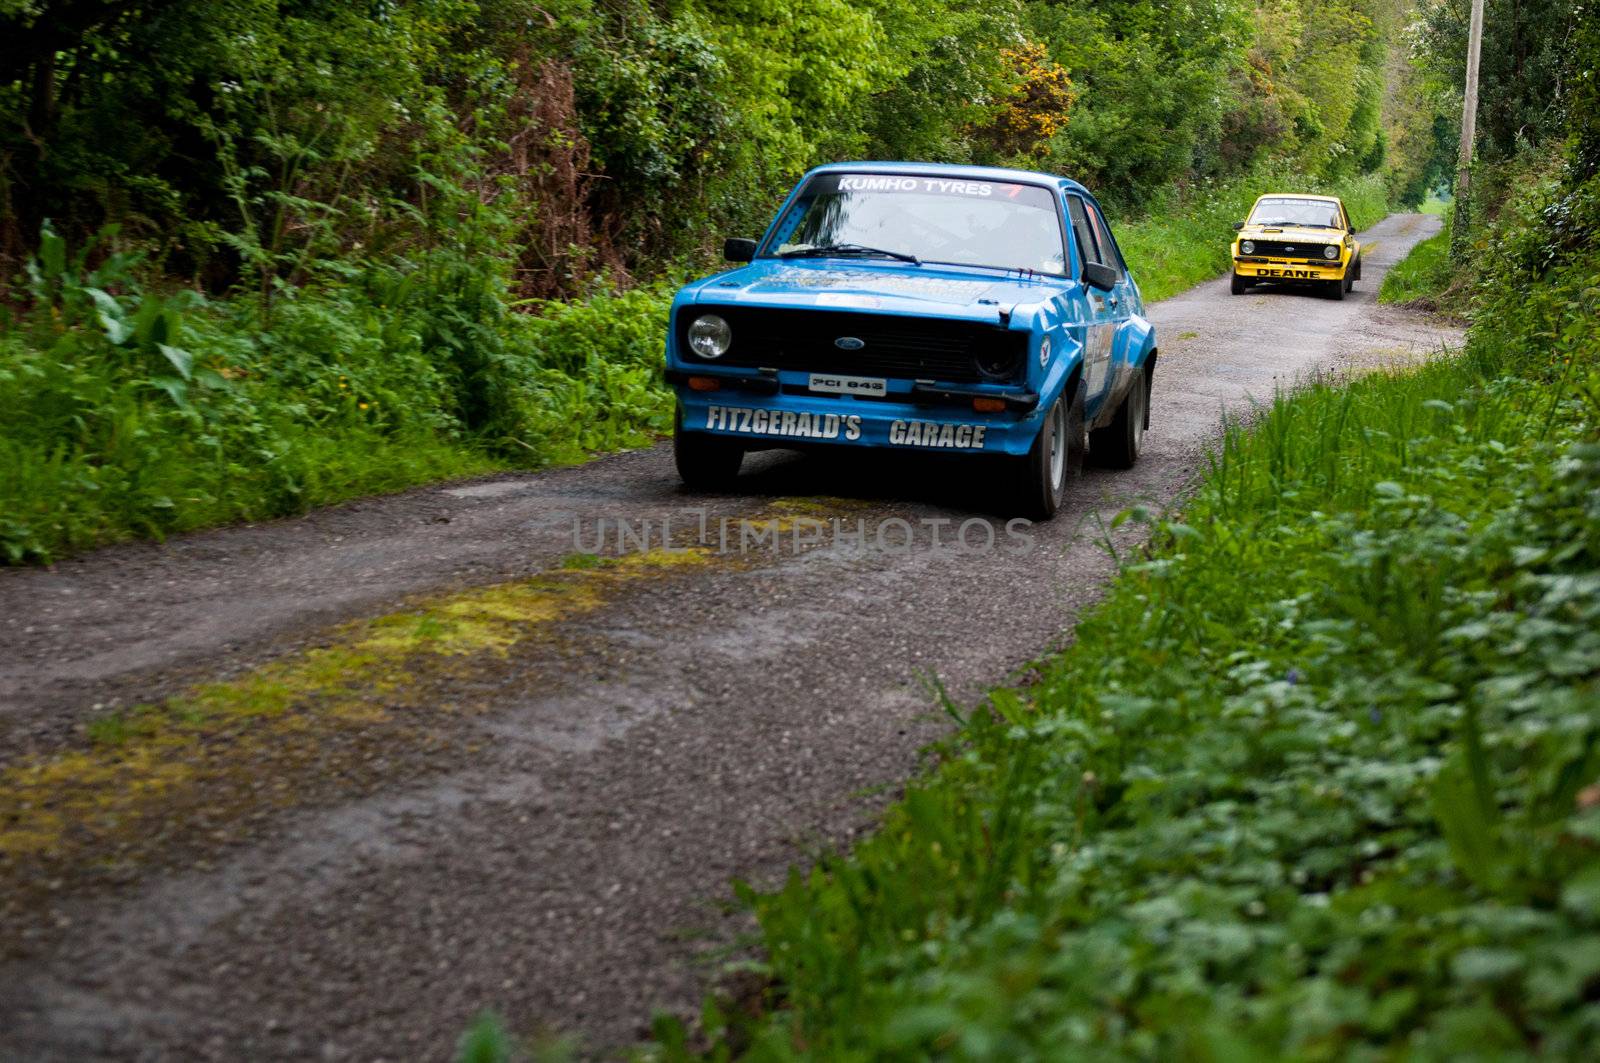 MALLOW, IRELAND - MAY 19: P. Fitzgerald driving Ford Escort at the Jim Walsh Cork Forest Rally on May 19, 2012 in Mallow, Ireland. 4th round of the Valvoline National Forest Rally Championship.